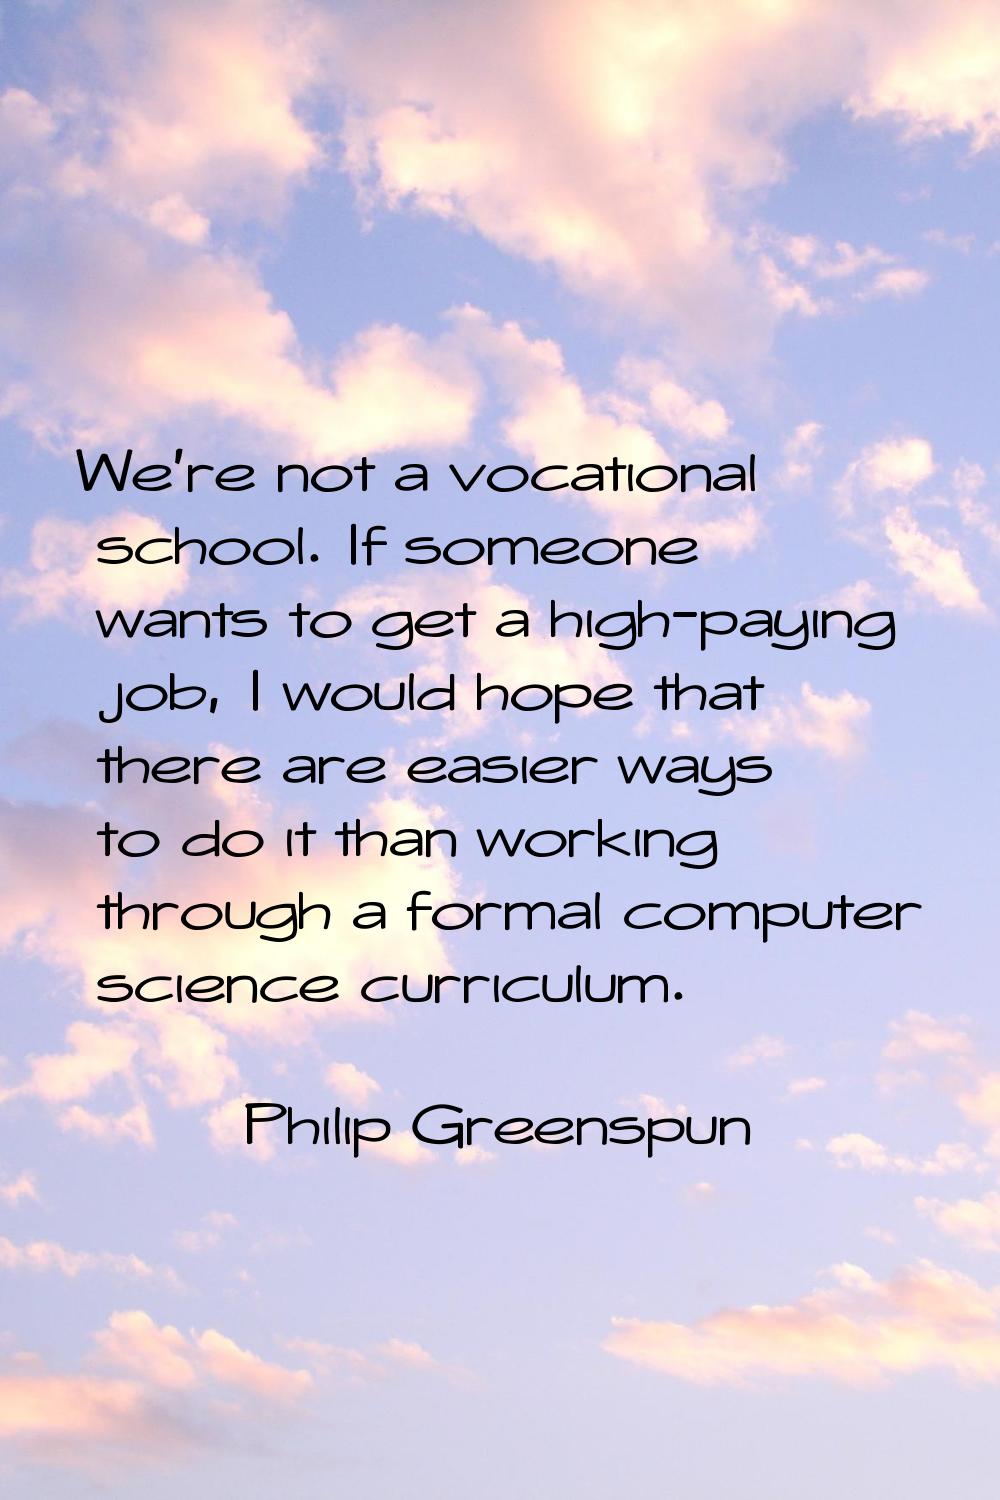 We're not a vocational school. If someone wants to get a high-paying job, I would hope that there a